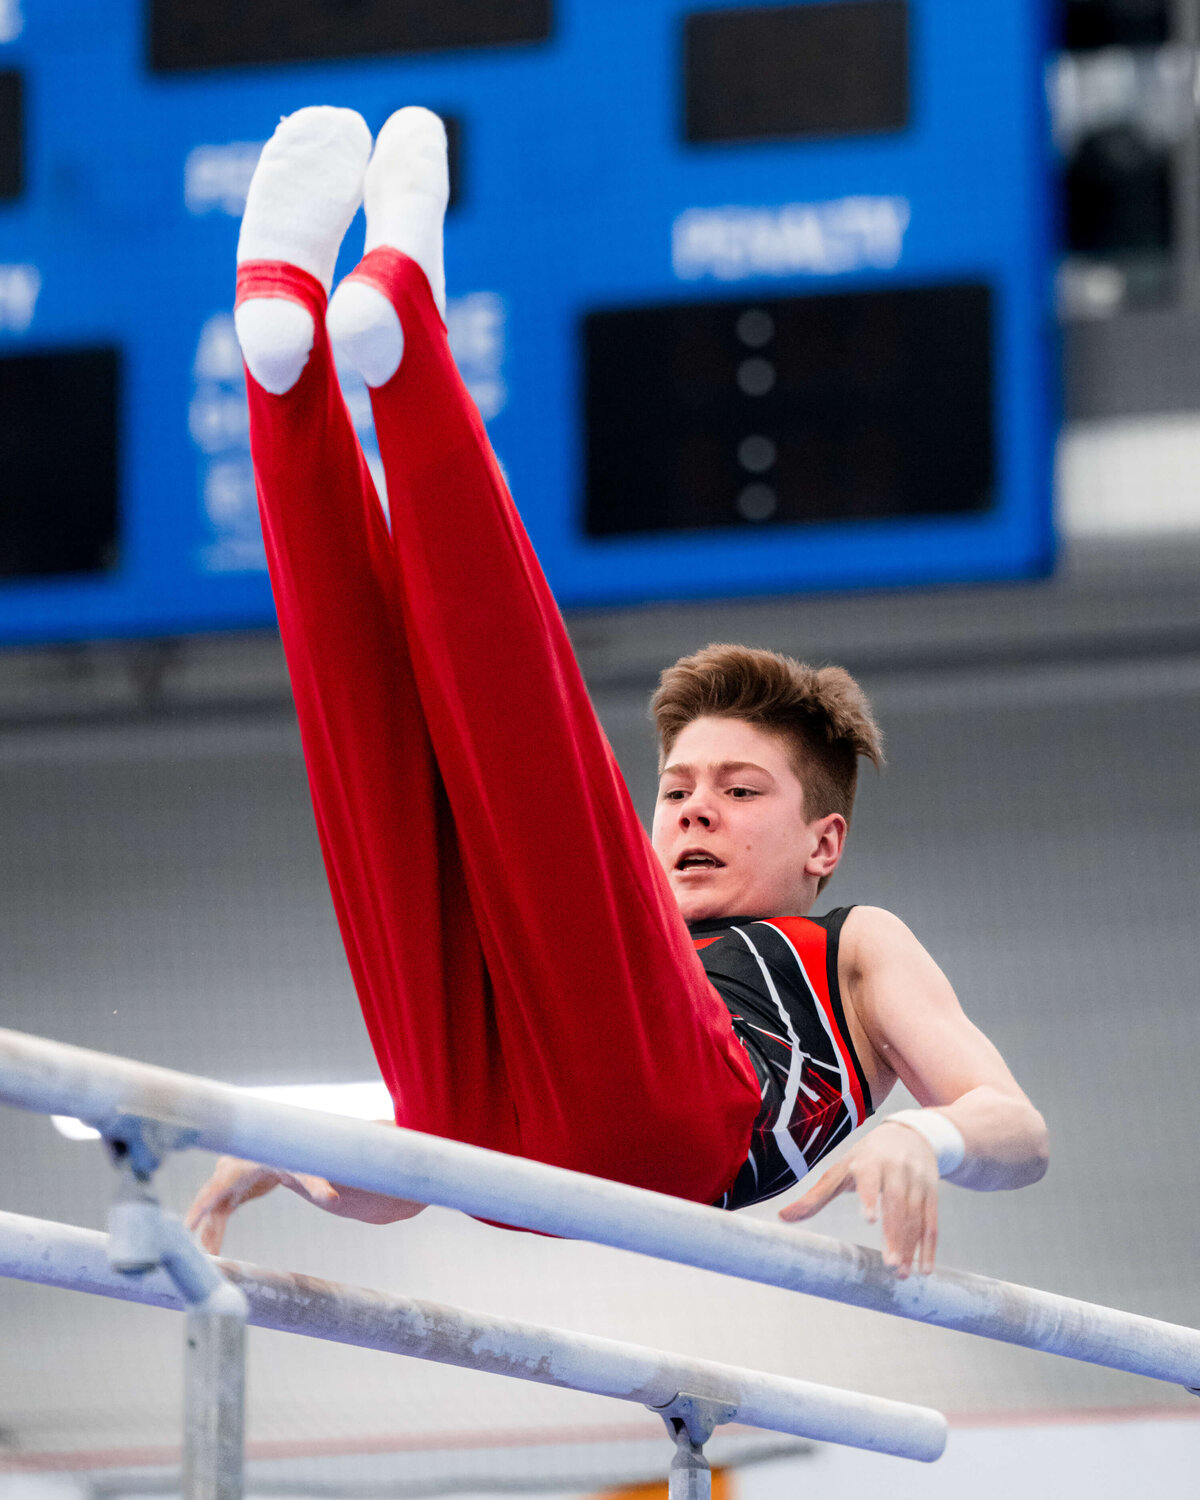 Photo by Luke O'Geil taken at the 2023 inaugural Grizzly Classic men's artistic gymnastics competitionA1_02867